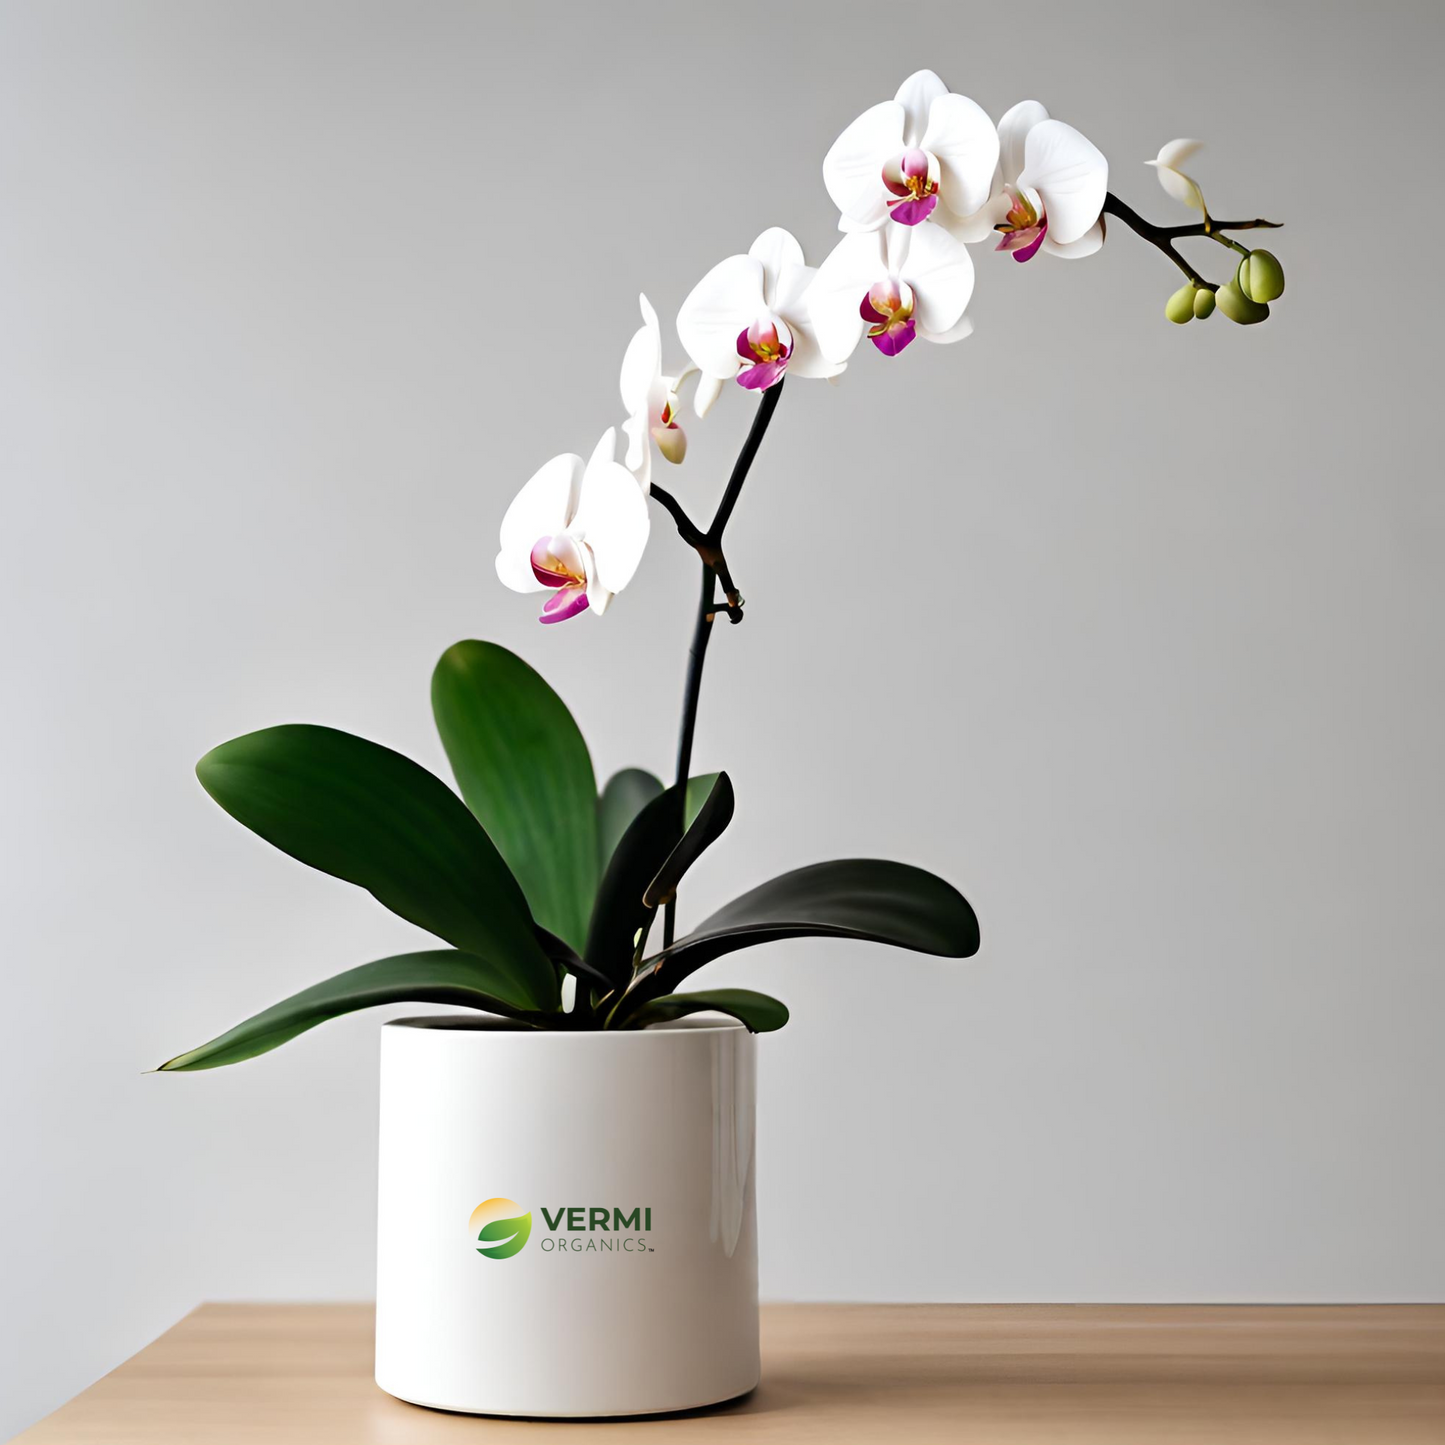 Pack of 2 pretty Phalaenopsis Orchid plants